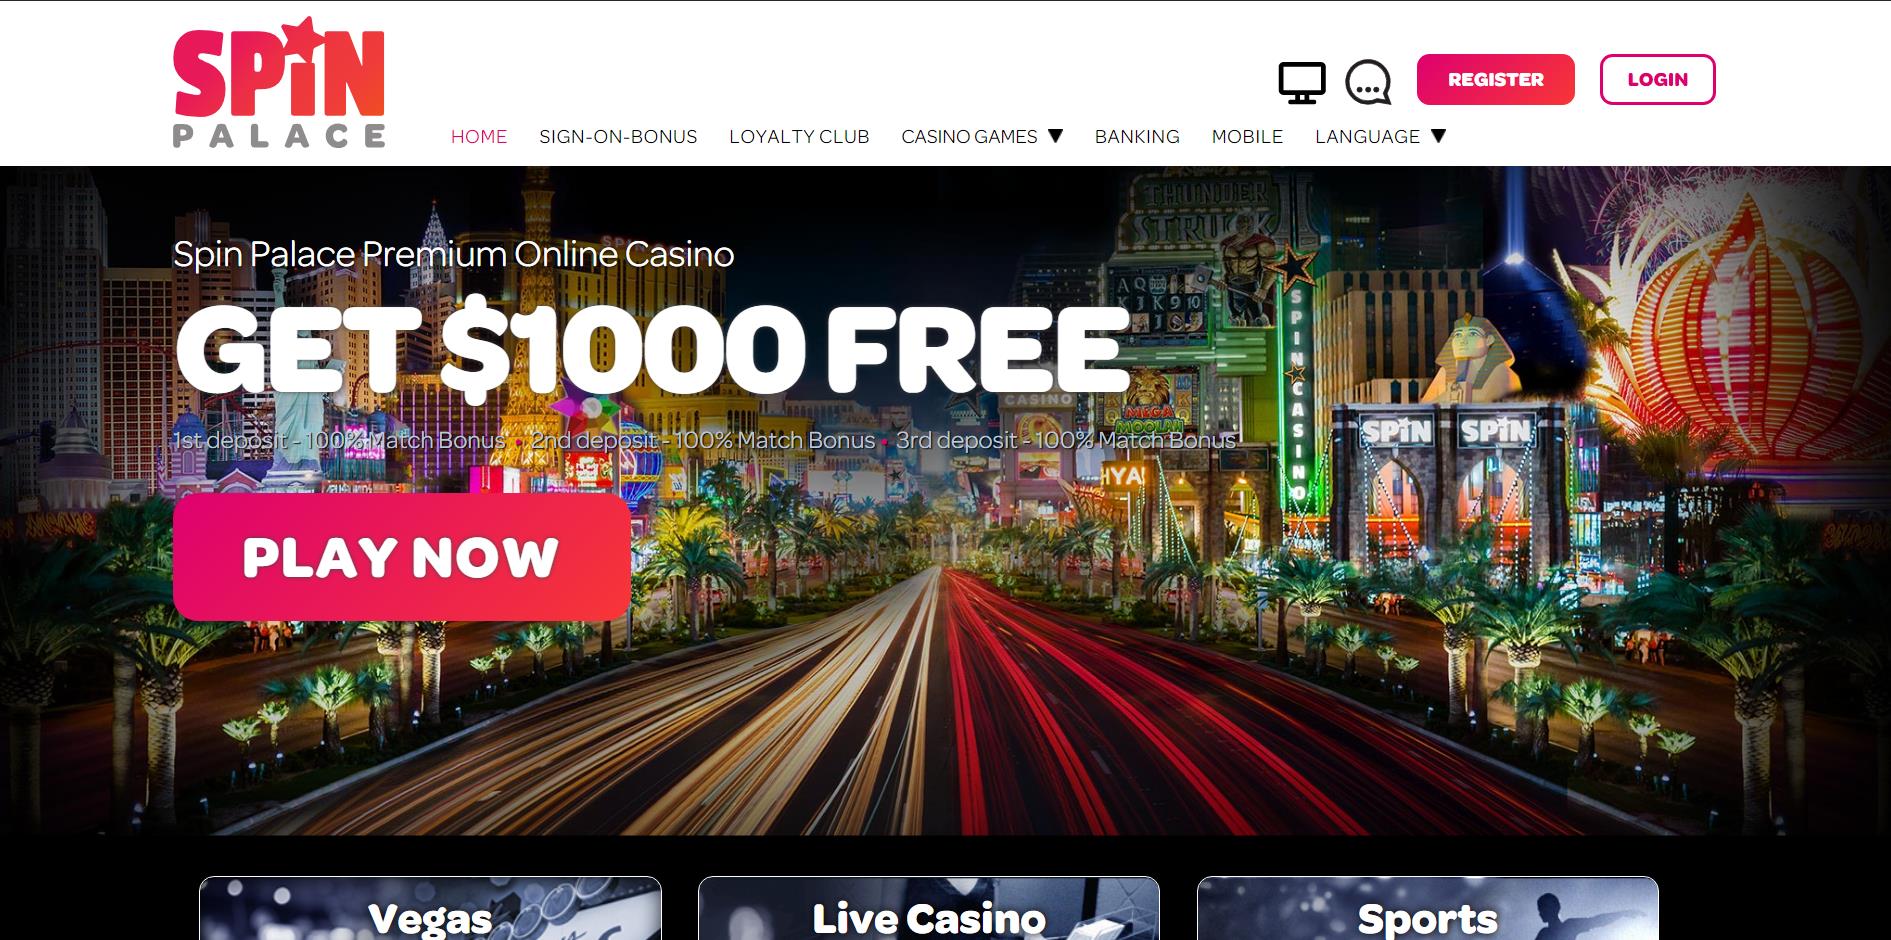 5 Surefire Ways casino games demo Will Drive Your Business Into The Ground